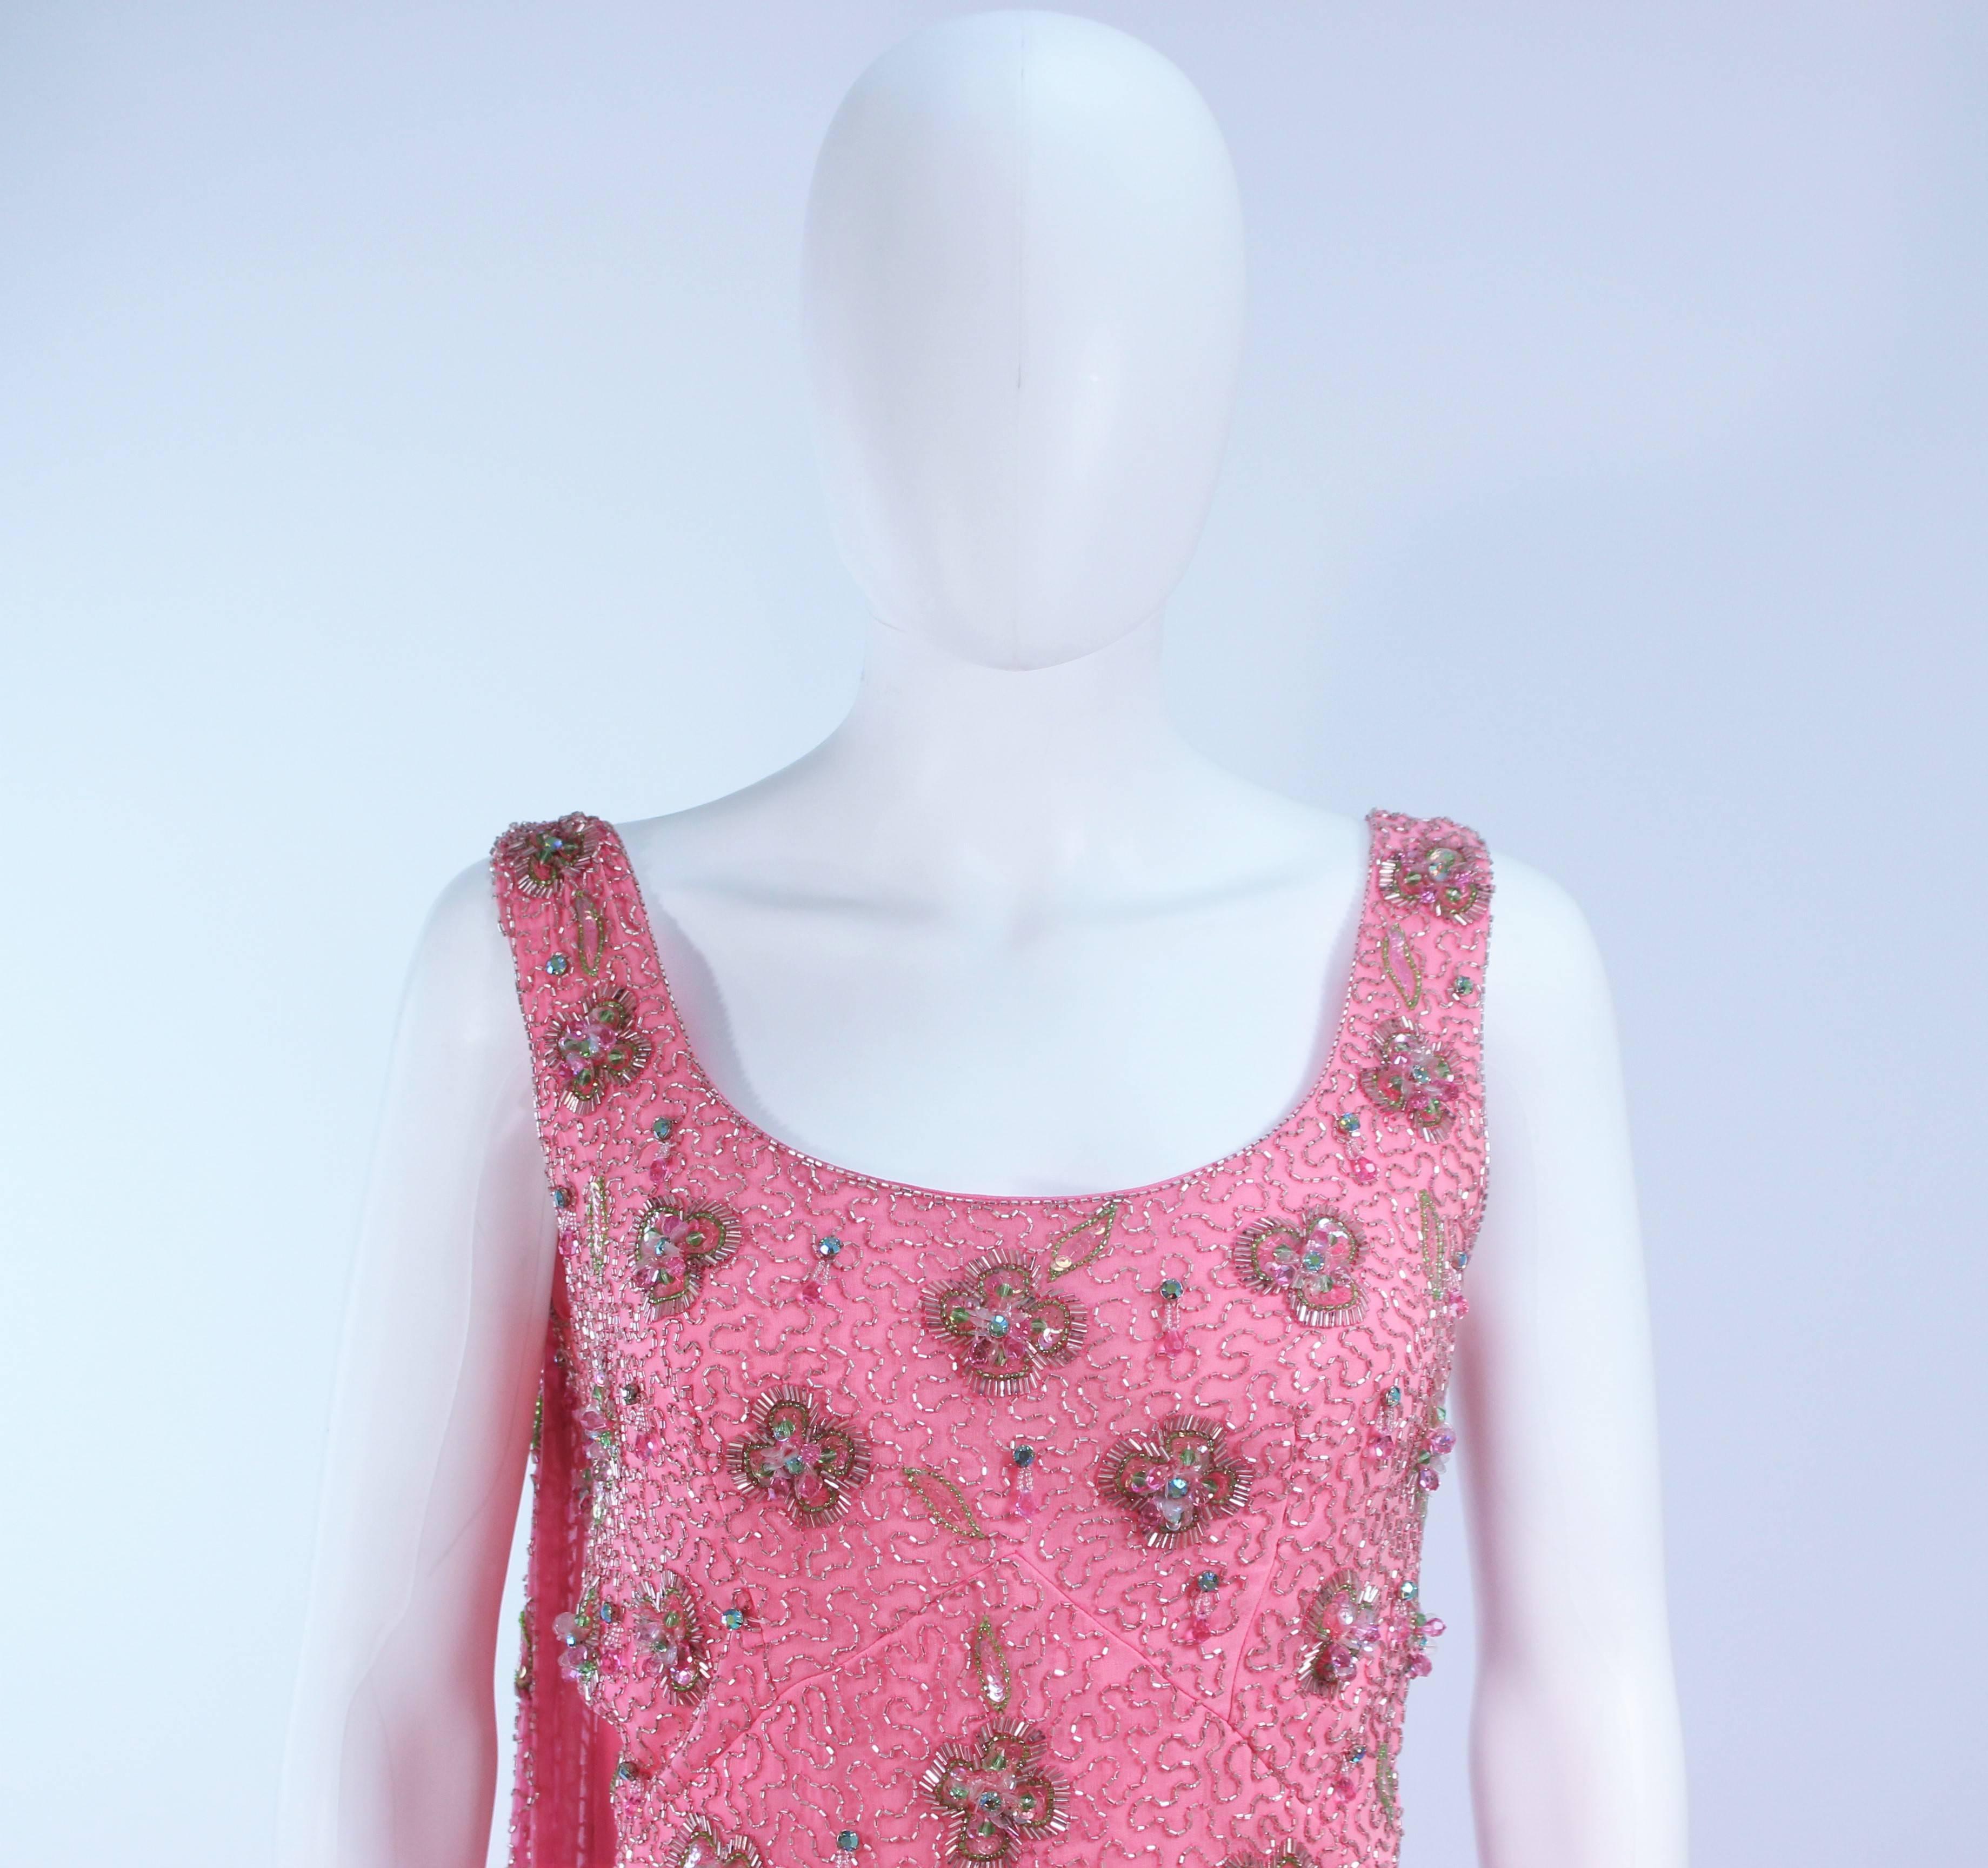 MAXWELL SHIEFF 1950's Pink Heavily Embellished Drape Gown Size 2 4  In Excellent Condition For Sale In Los Angeles, CA